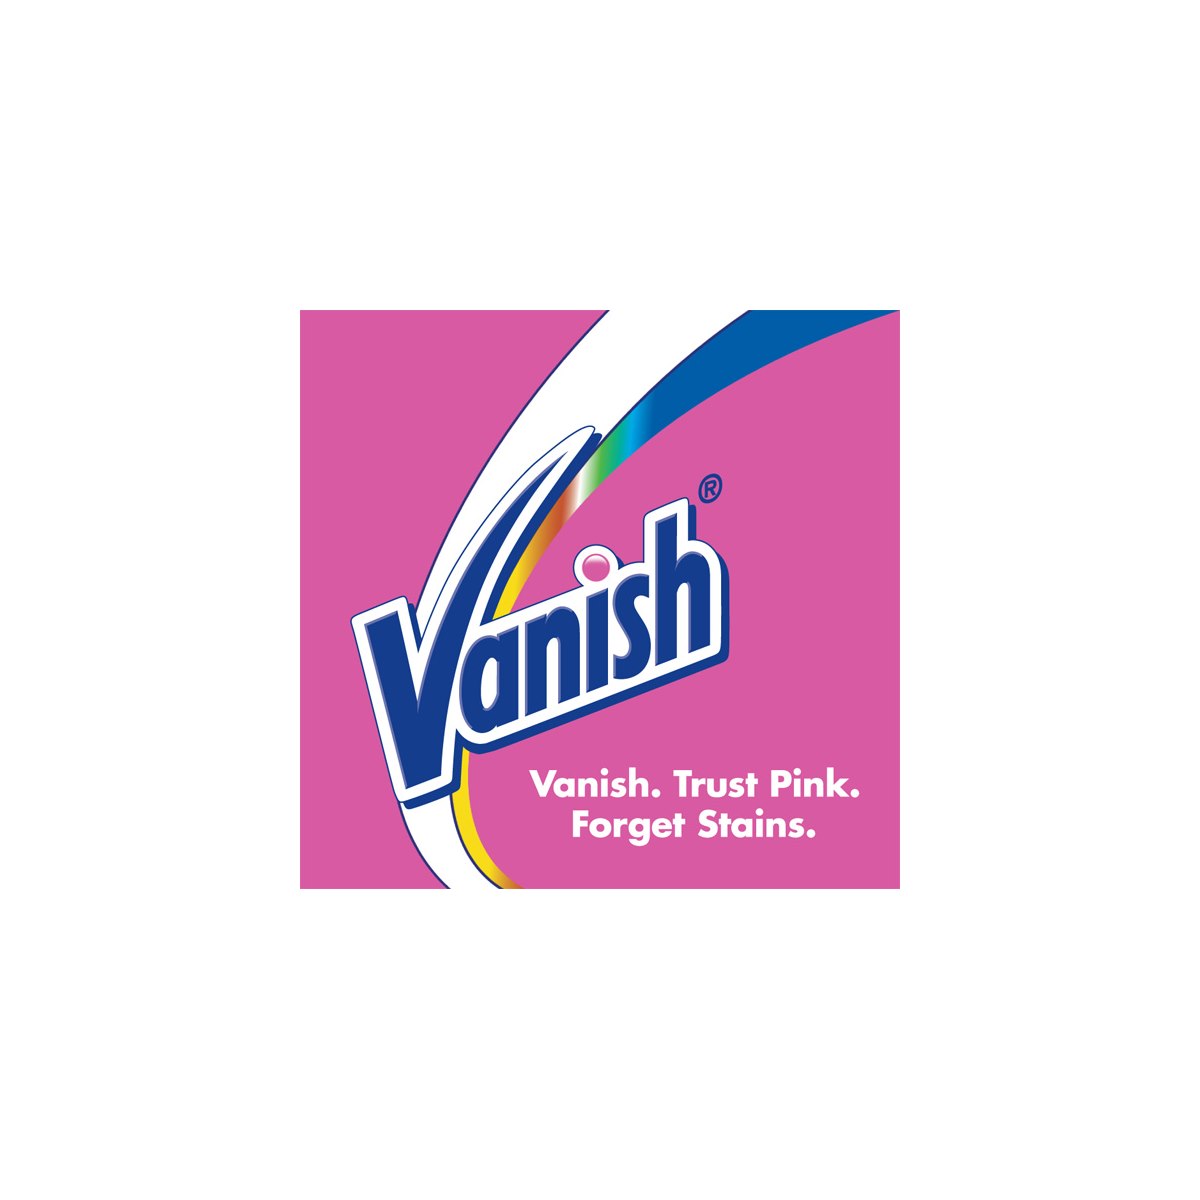 Where to Buy Vanish Products